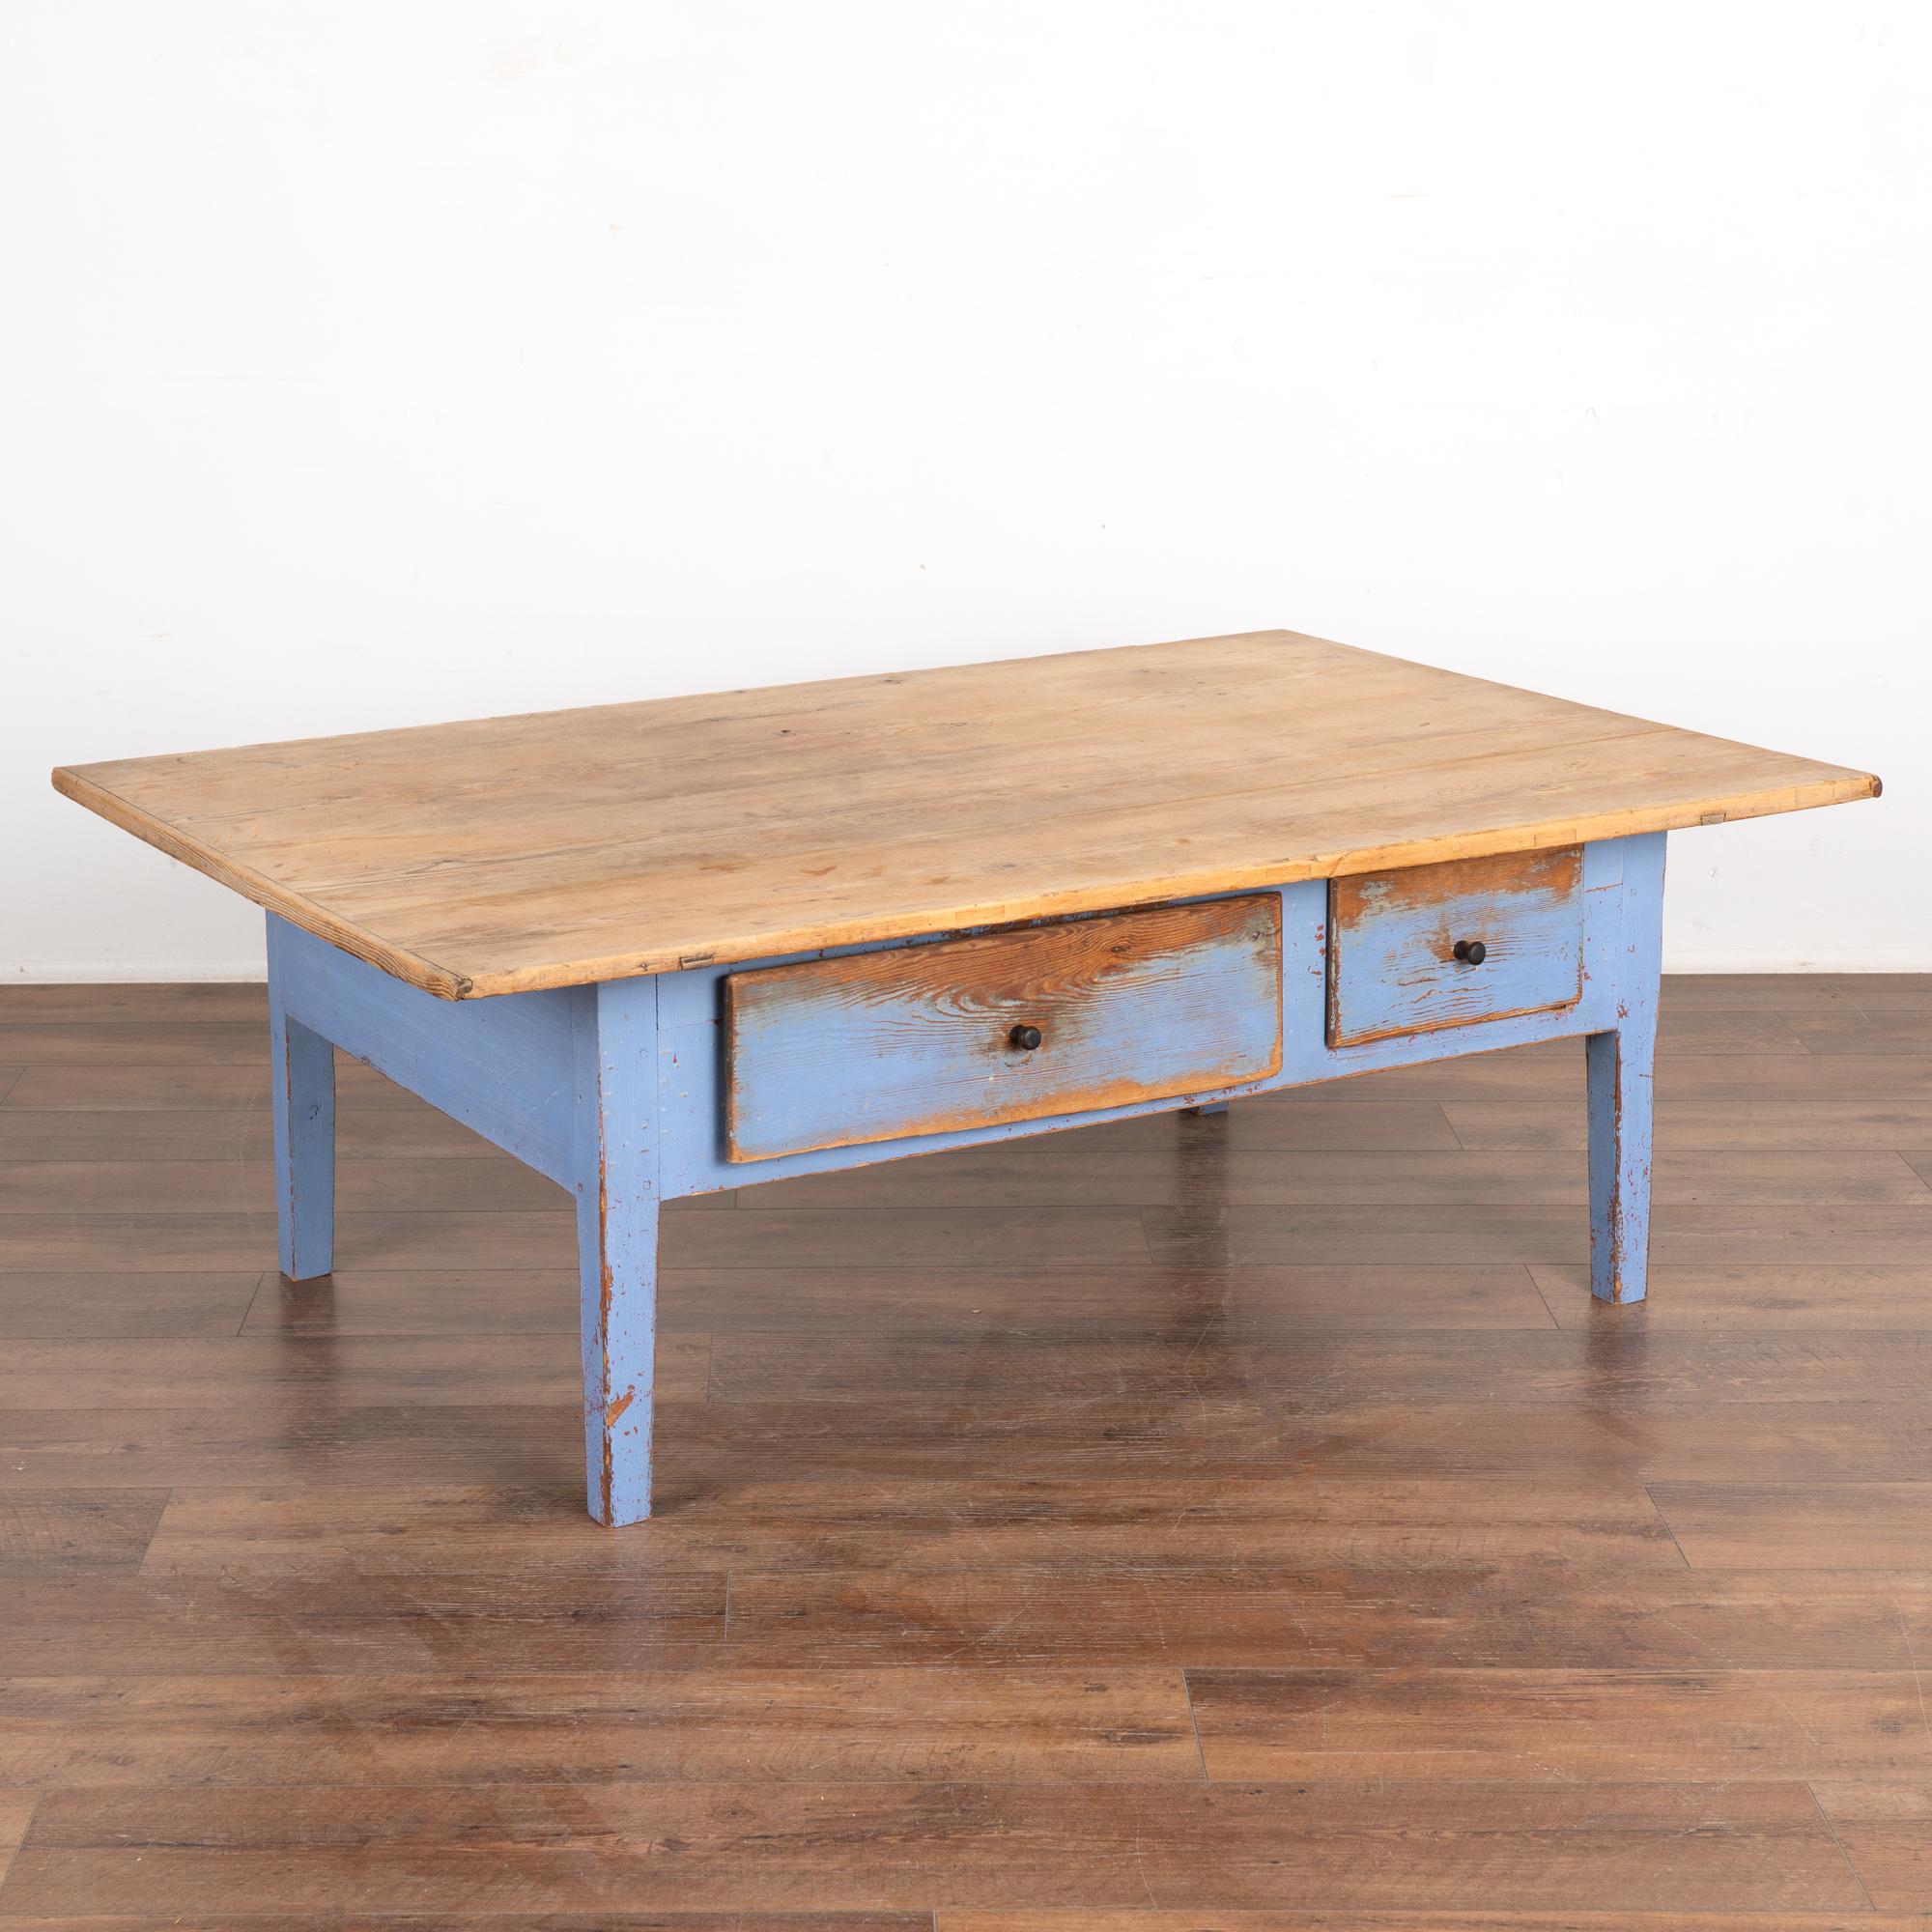 The rustic appeal of this coffee table comes from the aged patina of the pine wood top which contrast with the cheerful blue painted base.
Every scratch, nick, crack and stain simply add to the draw of this coffee table with two drawers. Note how